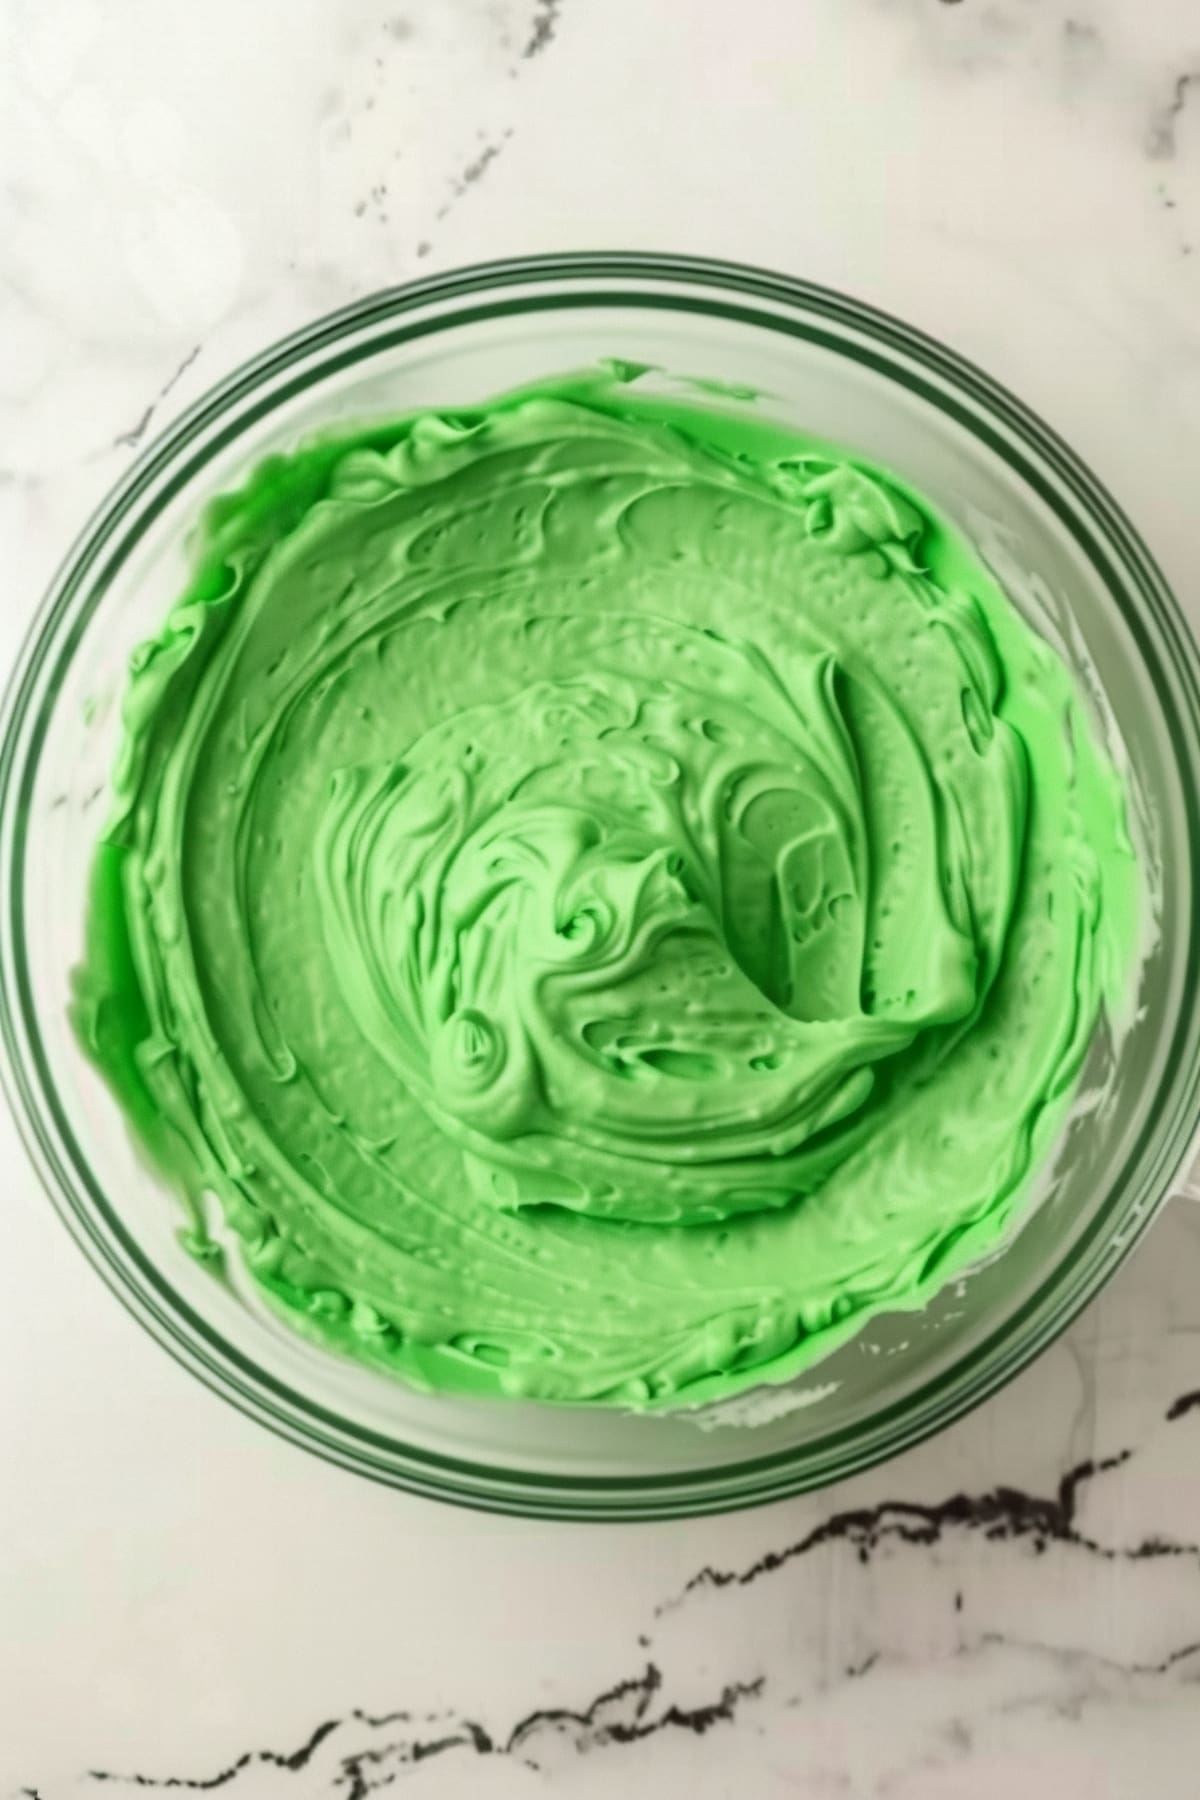 A glass bowl of green, mint pudding for Shamrock shake pie, overhead view